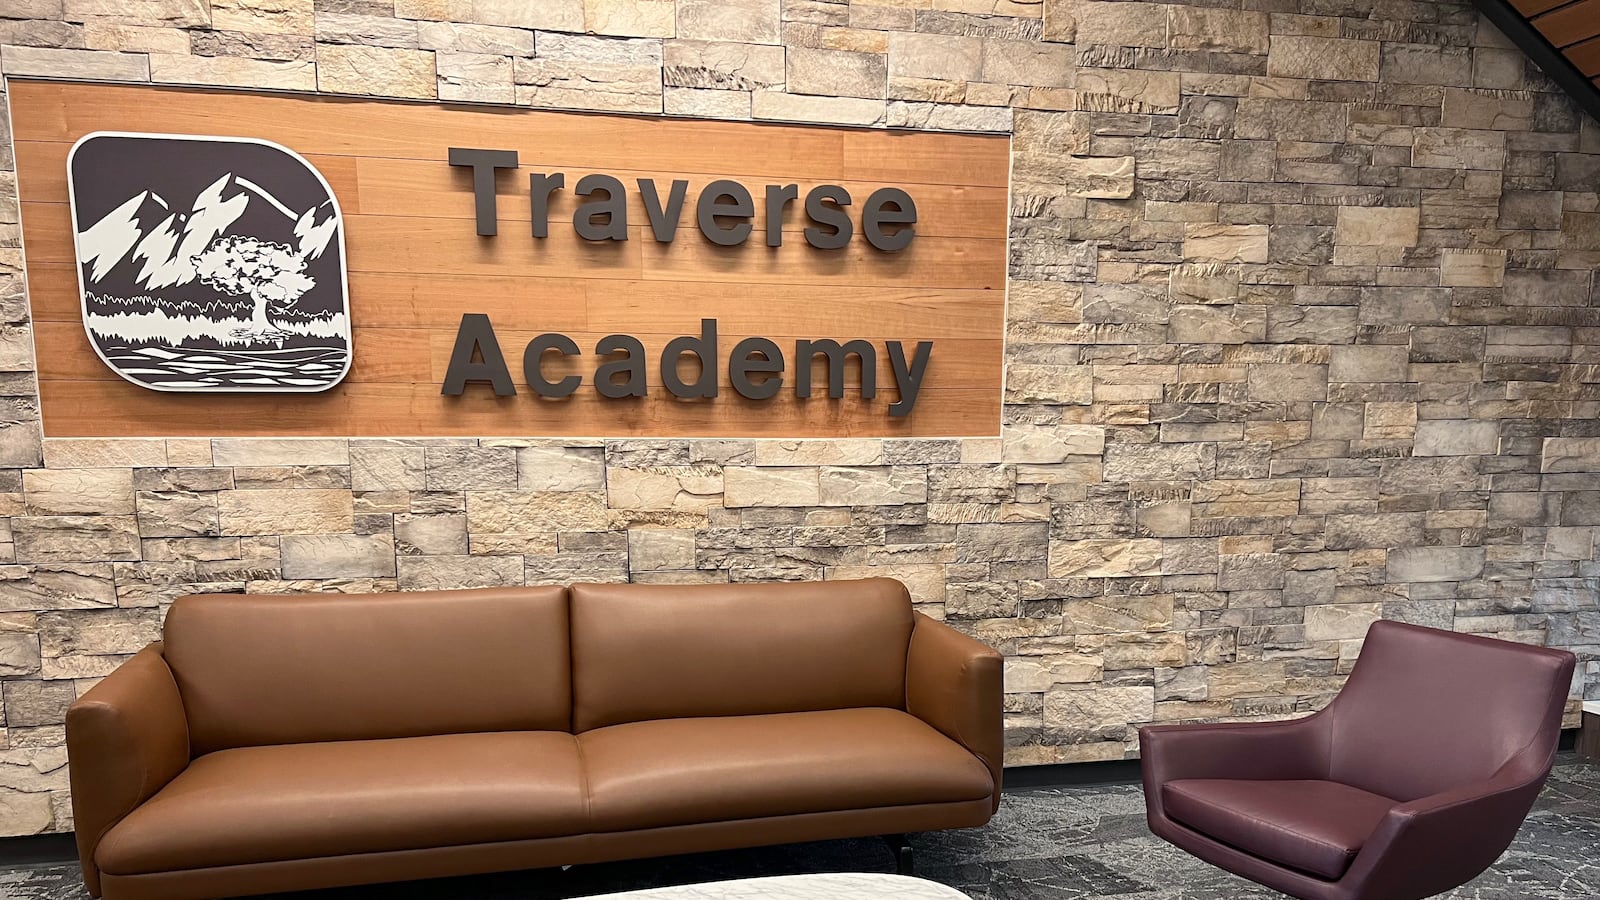 A brown couch and read chair sit in front of a wooden sign that hangs on the wall and reads “Traverse Academy.”